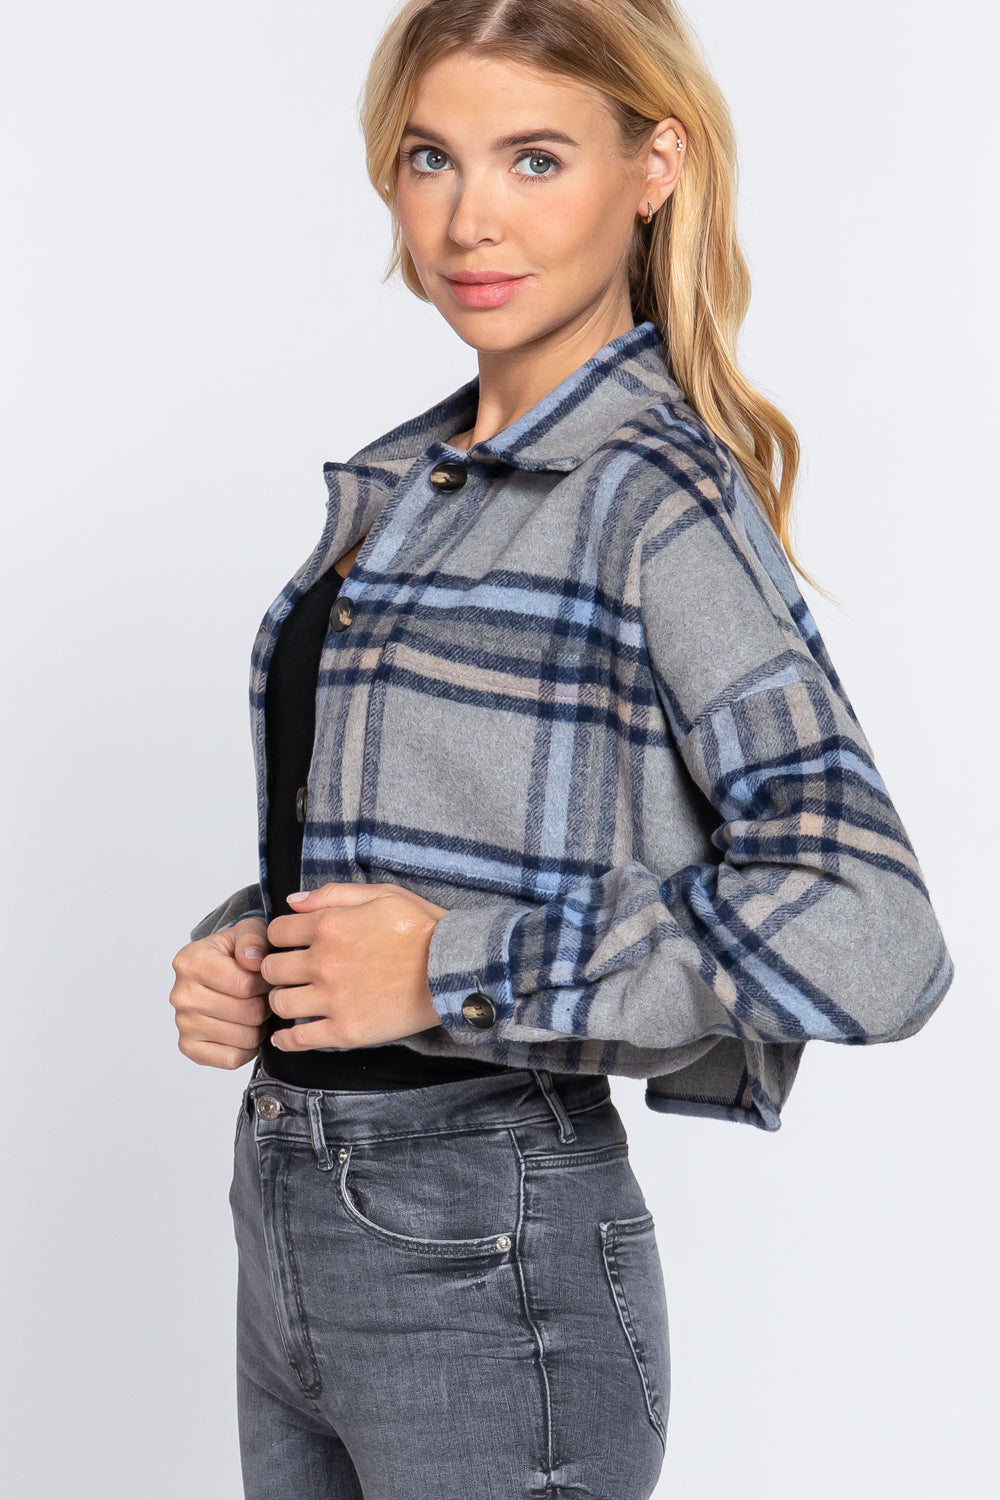 Wool Plaid Oversized Crop Shacket - women's shacket at TFC&H Co.